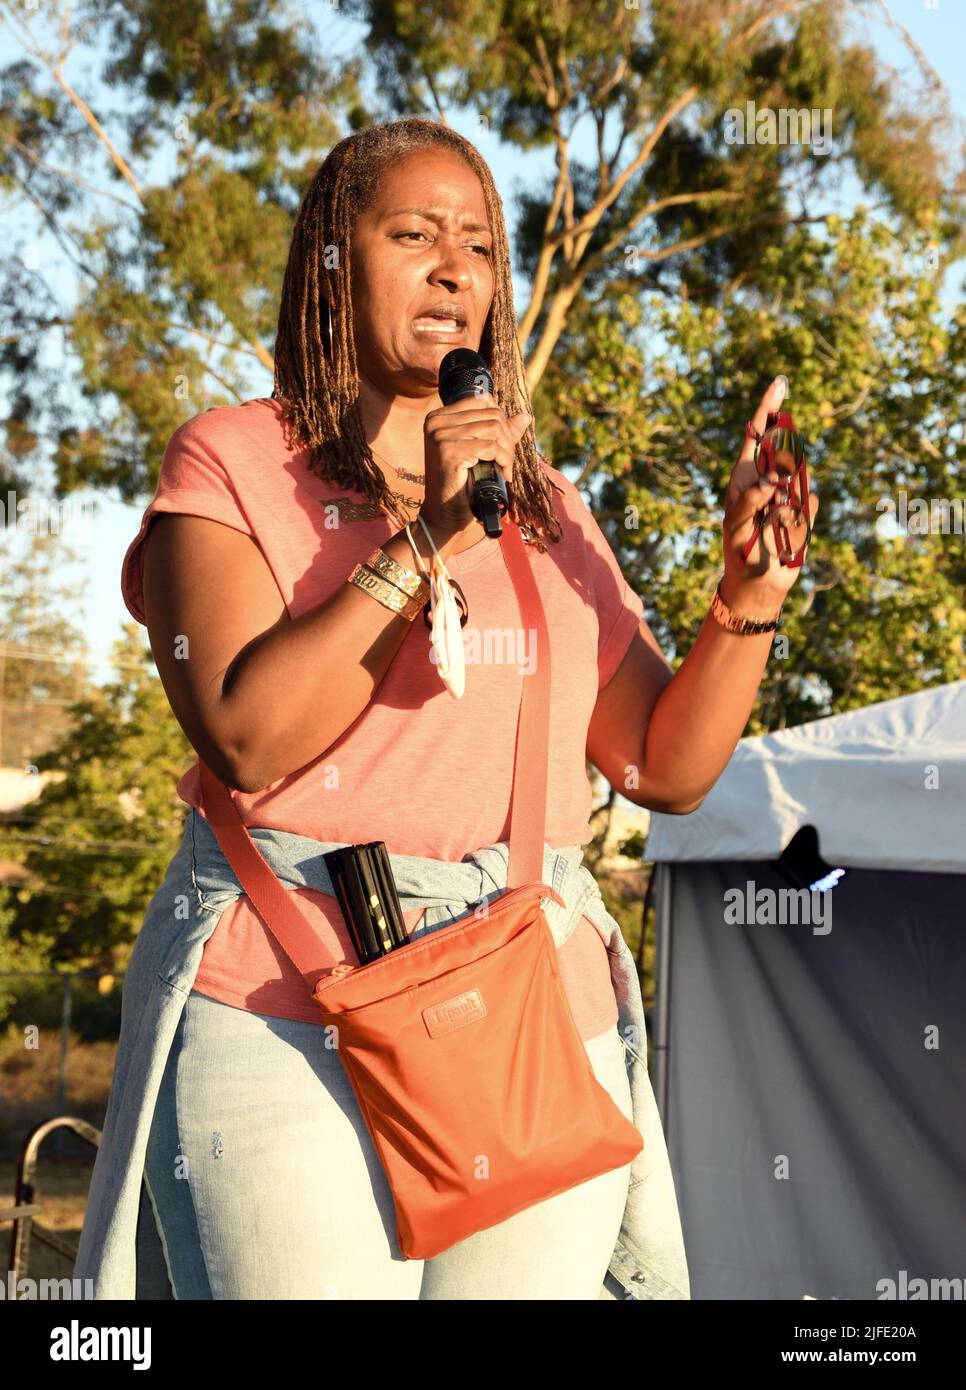 Los Angeles, USA. 01st July, 2022. LA Supervisor Holly Mitchell attends the 2022 South LA Pride Community Picnic at the Norman O. Houston Park in Los Angeles, USAlifornia on July 1, 2022 Credit: Koi Sojer/Snap'n U Photos/Media Punch/Alamy Live News Stock Photo